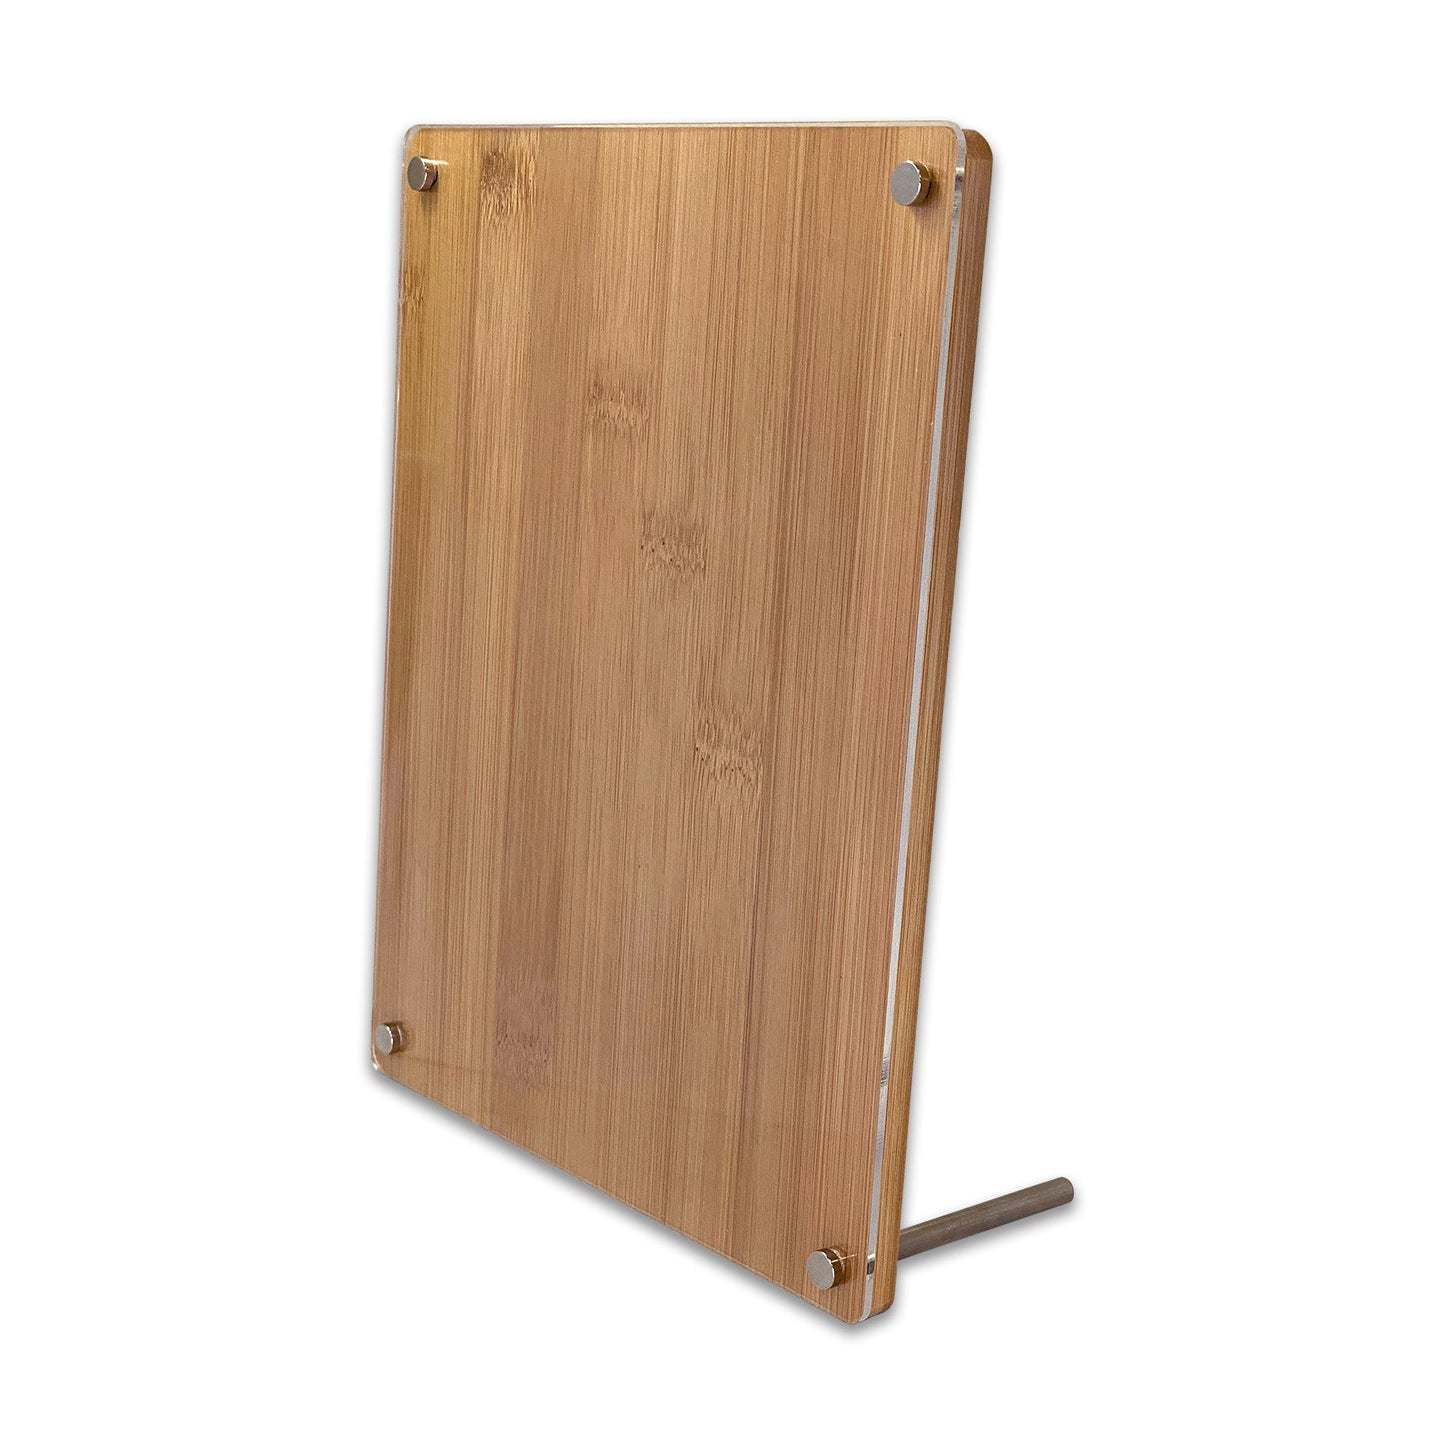 6" x 8" Bamboo and Acrylic Sign Holder Display Frame